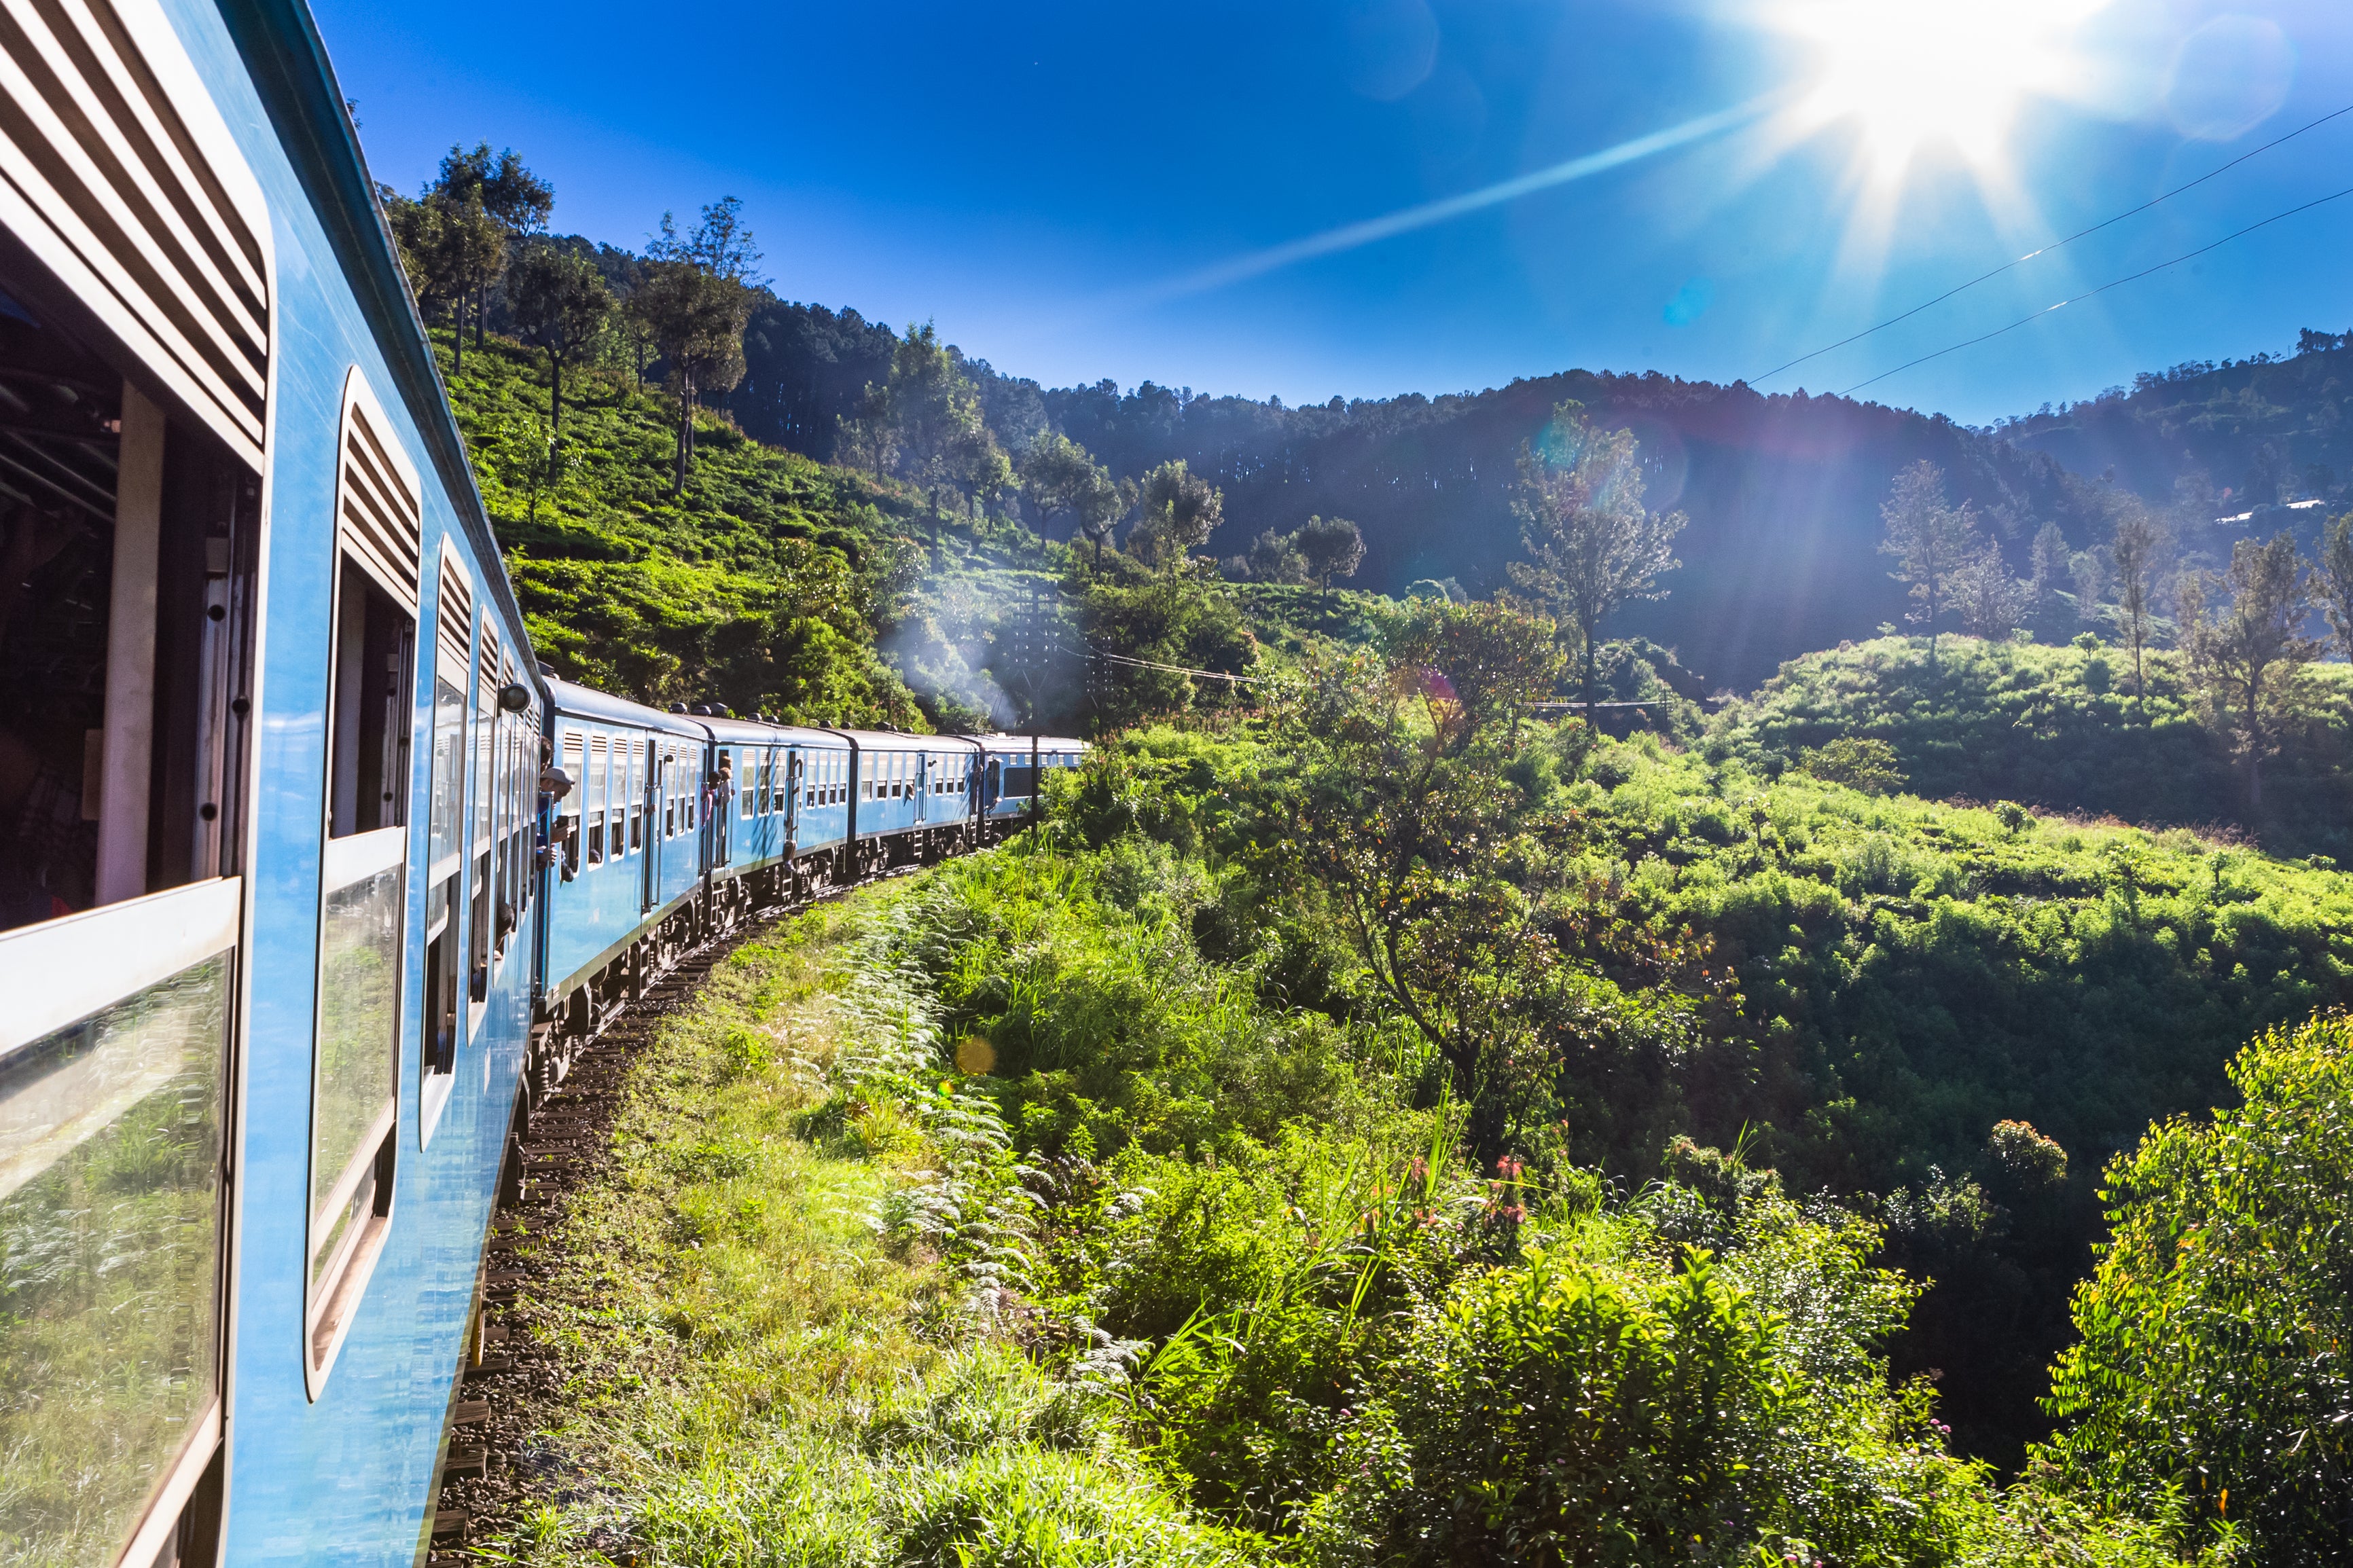 Sri Lanka travel guide: Everything to know before you go